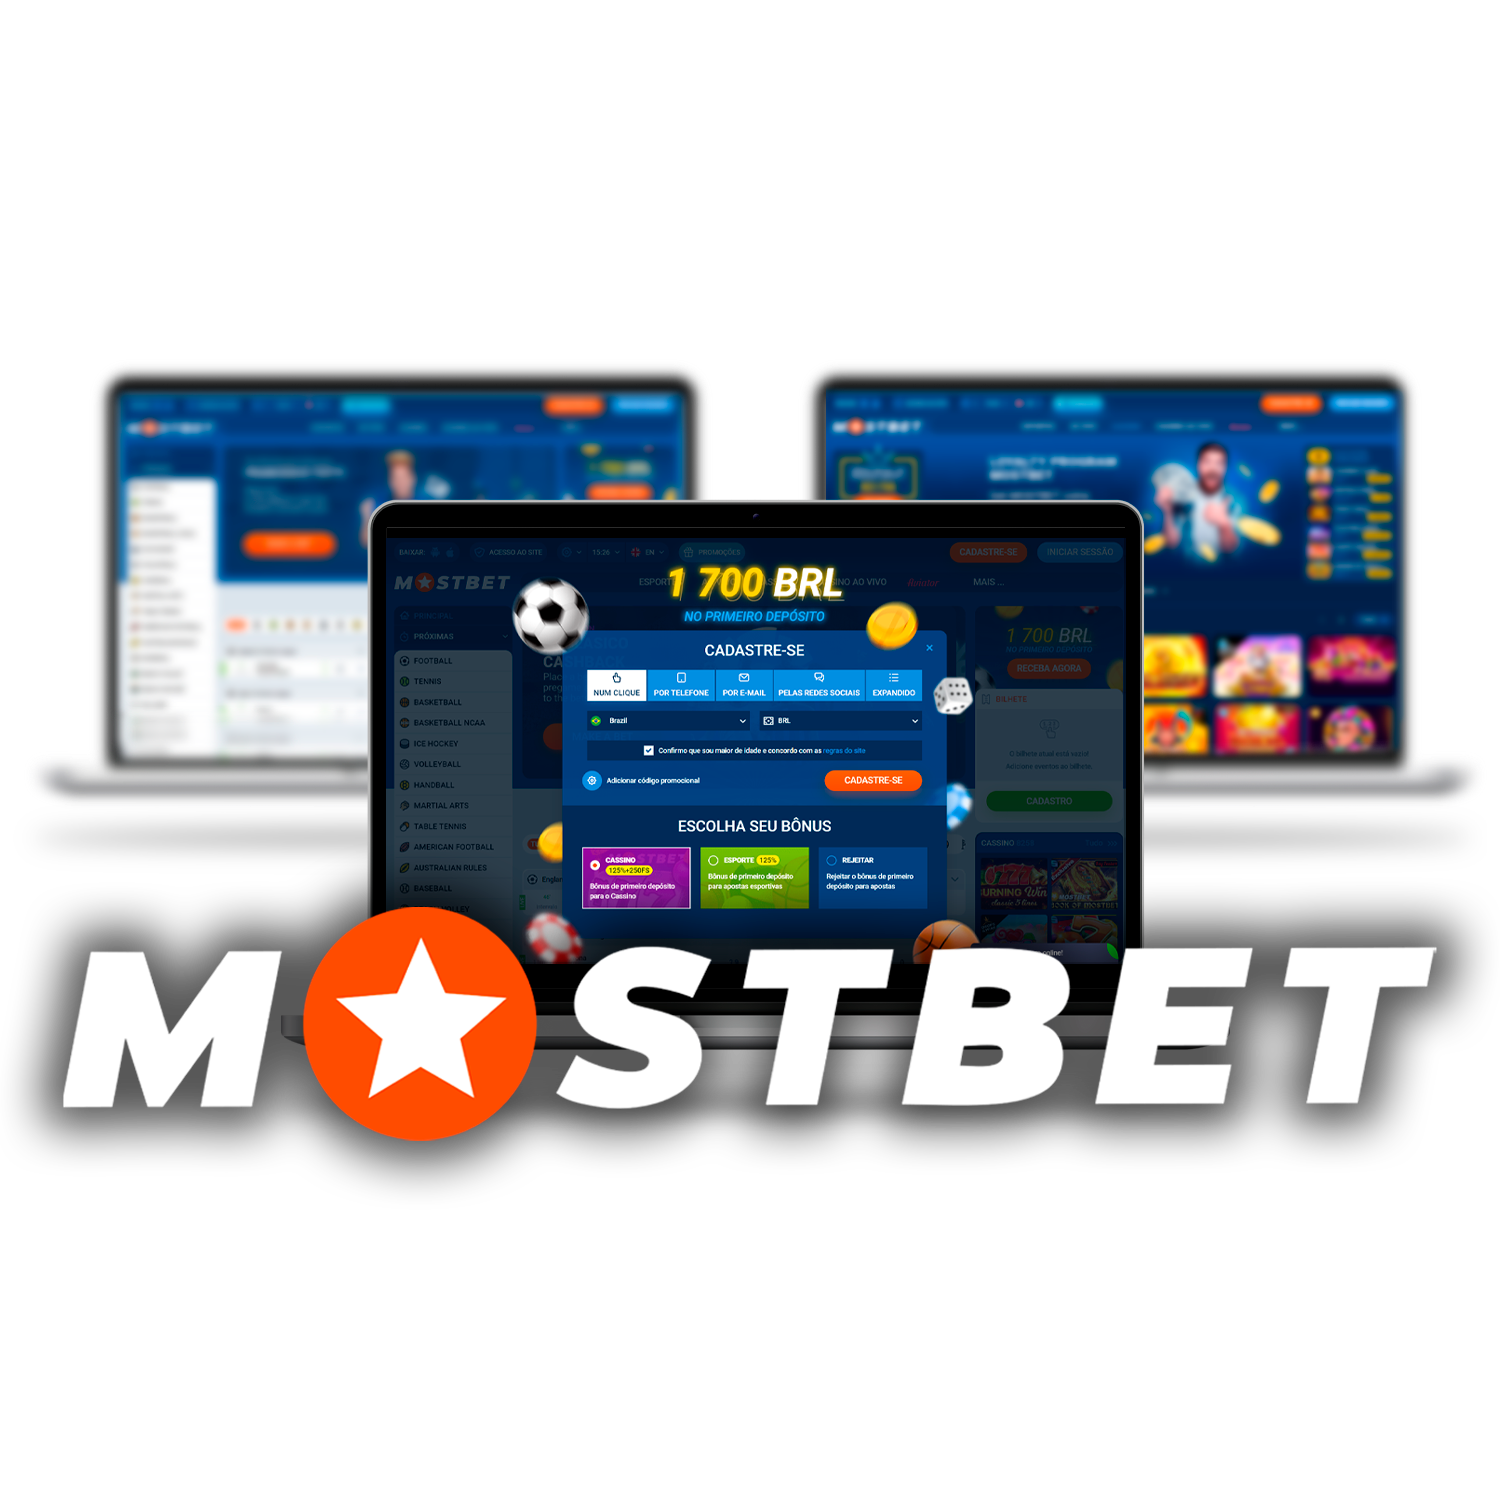 Mostbet Betting Company and Casino in Tunisia: An Incredibly Easy Method That Works For All